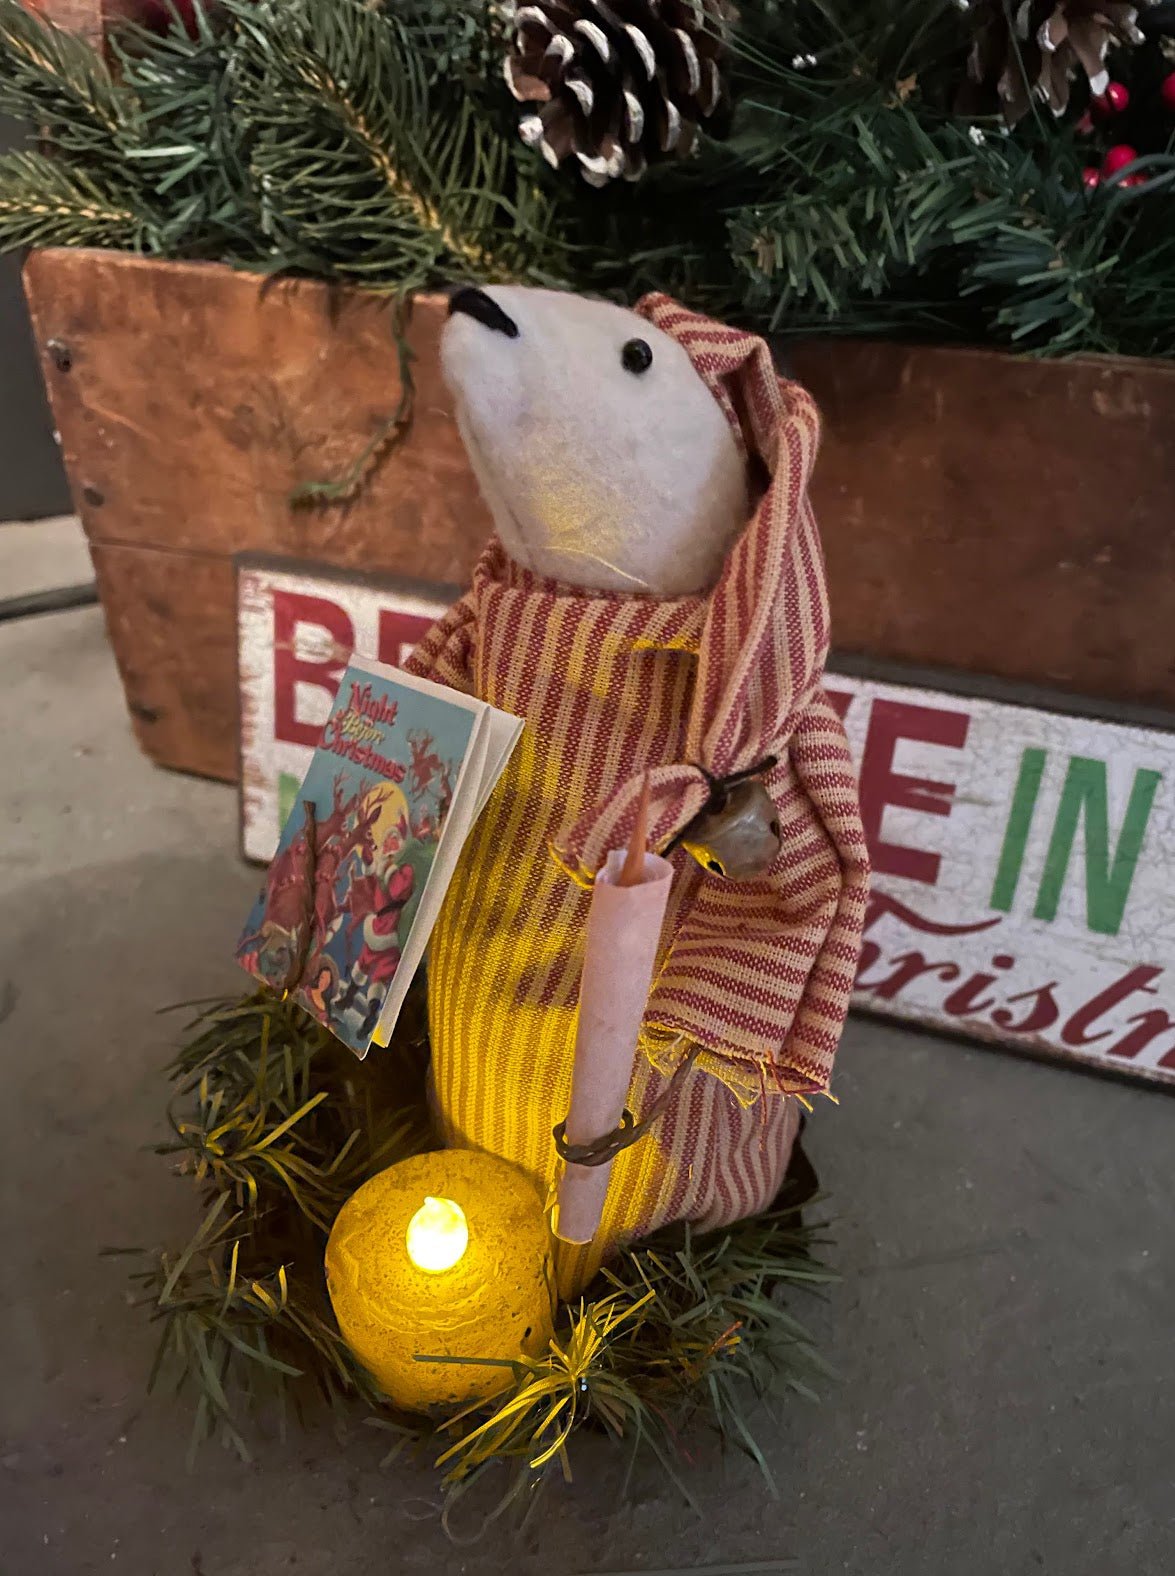 Primitive Handmade Night Before Christmas Mouse with Prim Tealight Candle - The Primitive Pineapple Collection